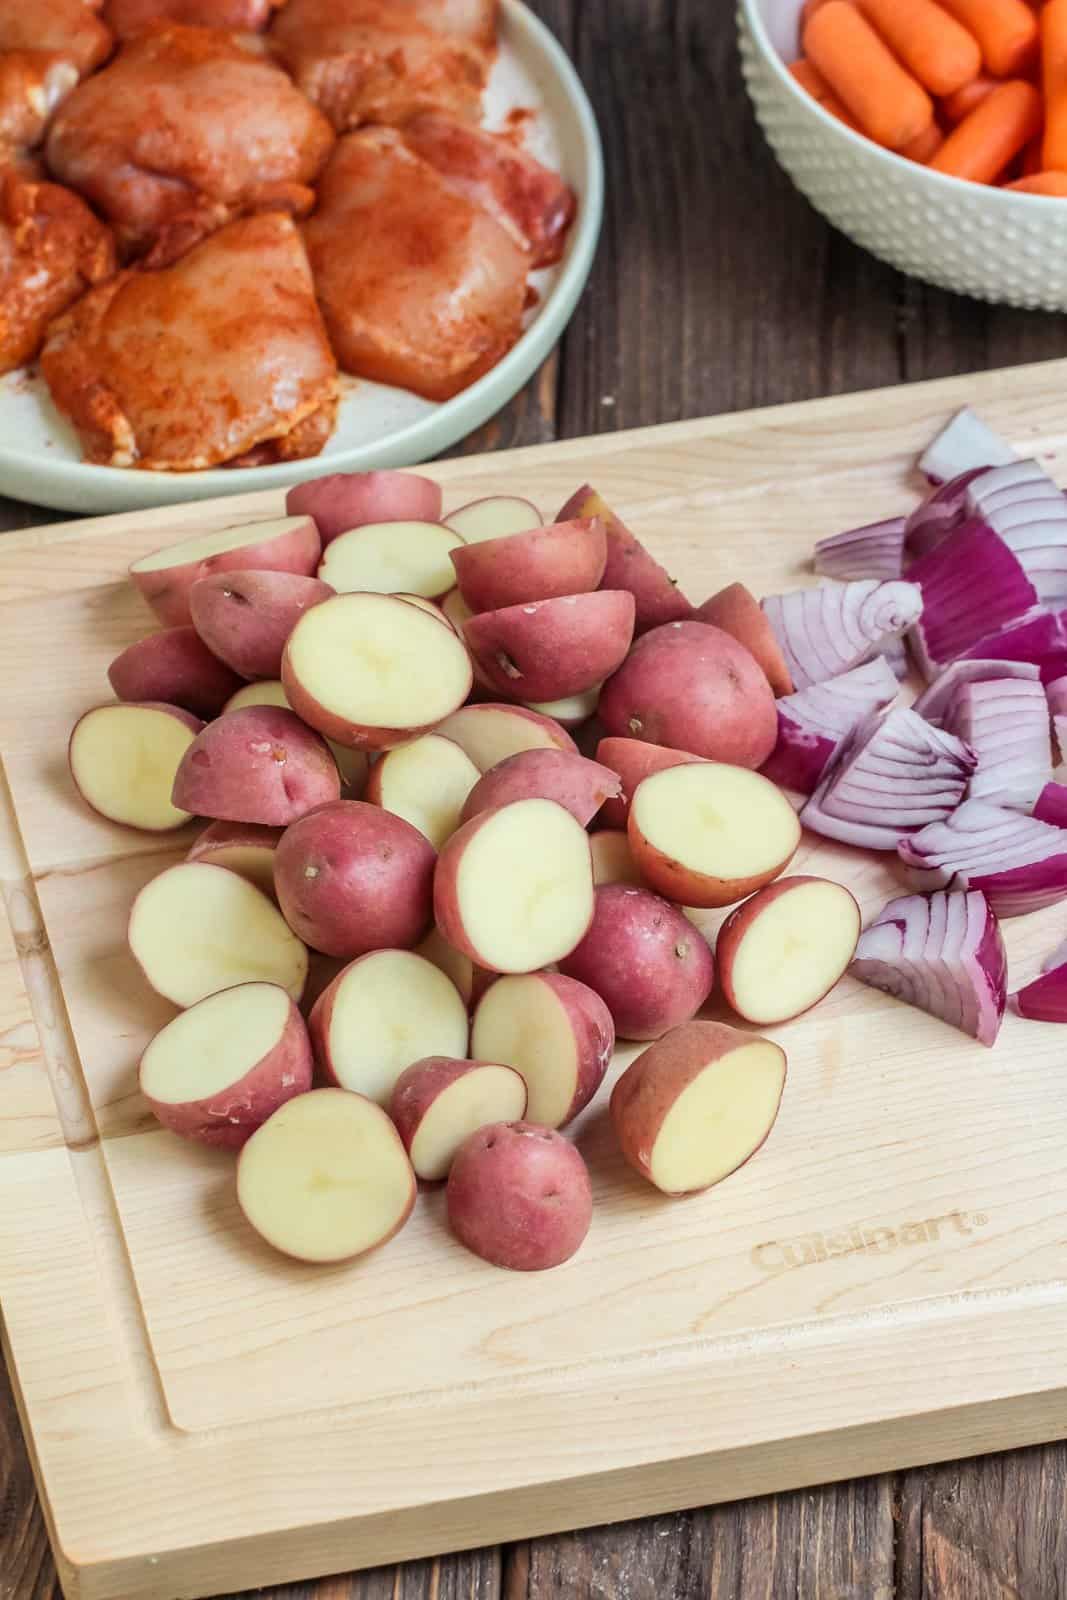 Potatoes and onions cut up on cutting board.